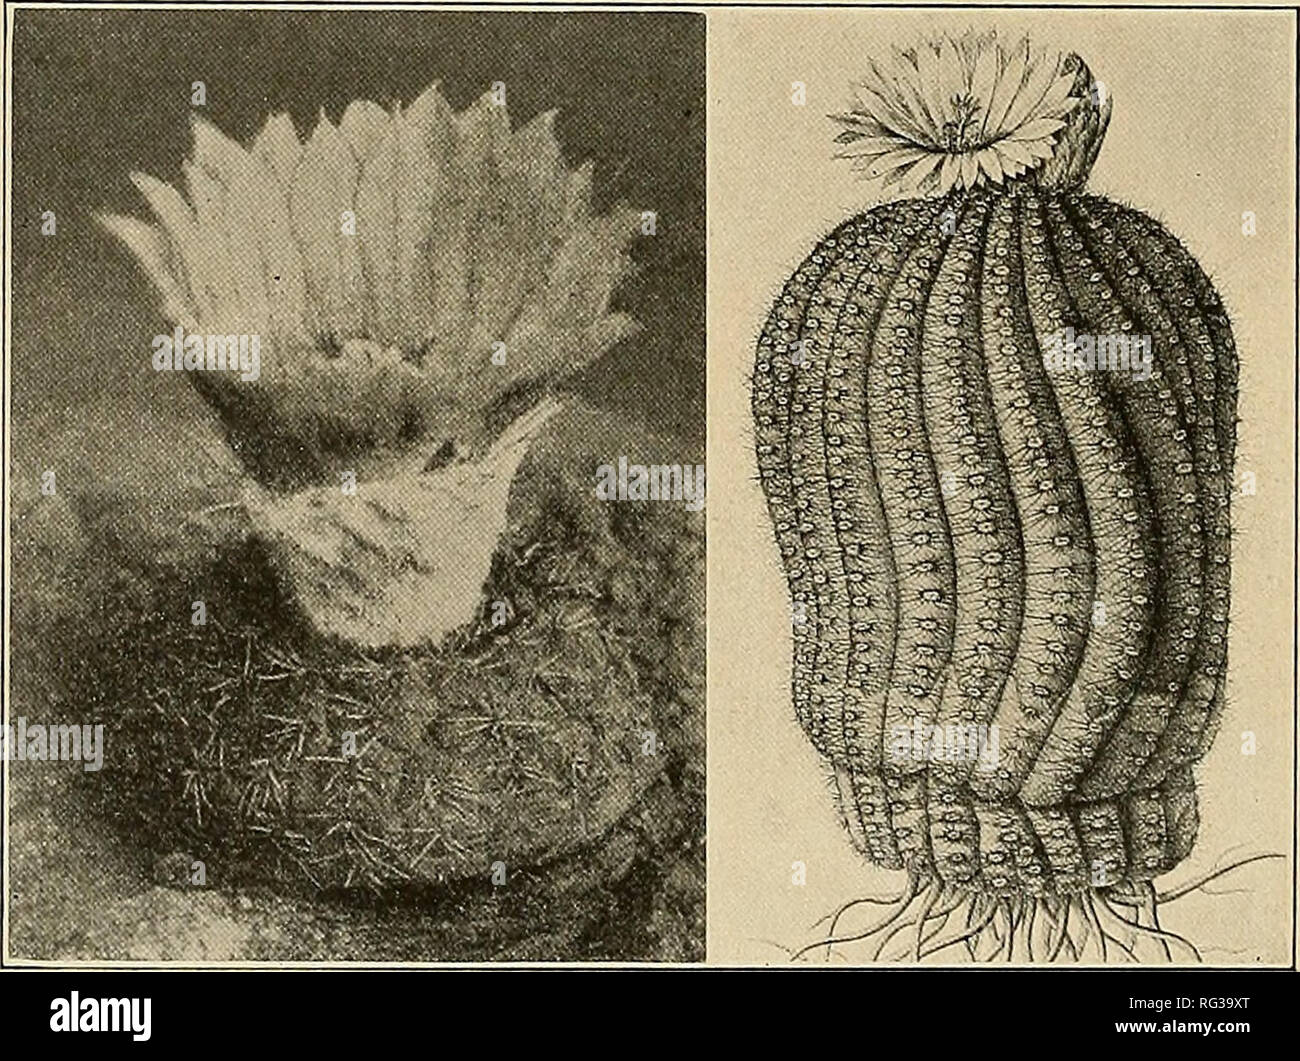 . The Cactaceae : descriptions and illustrations of plants of the cactus family. 194 THE CACTACEAE. scopa; Rev. Hort. 47: 375. f. 61; Riimpler, Sukkulenten 181. f. 100; Forster, Handb. Cact. ed. 2. 137. f. 7; Diet. Gard. Nicholson 4: 540. f. 24; Suppl. 336. f. 360 (these last five illus- trations are the same, and are sometimes called Echinopsis scopa Candida cristata, Echino- cactus scopa candidus, E. scopa candidus cristatus, and E. scopa cristatus); Loudon, Encycl. PI. ed. 3. 1378. f. 19383; Curtis's Bot. Mag. 90: pi. 5445; Edwards's Bot. Reg. 25: pi. 24; Forster, Handb. Cact. ed. 2. 136. f Stock Photo